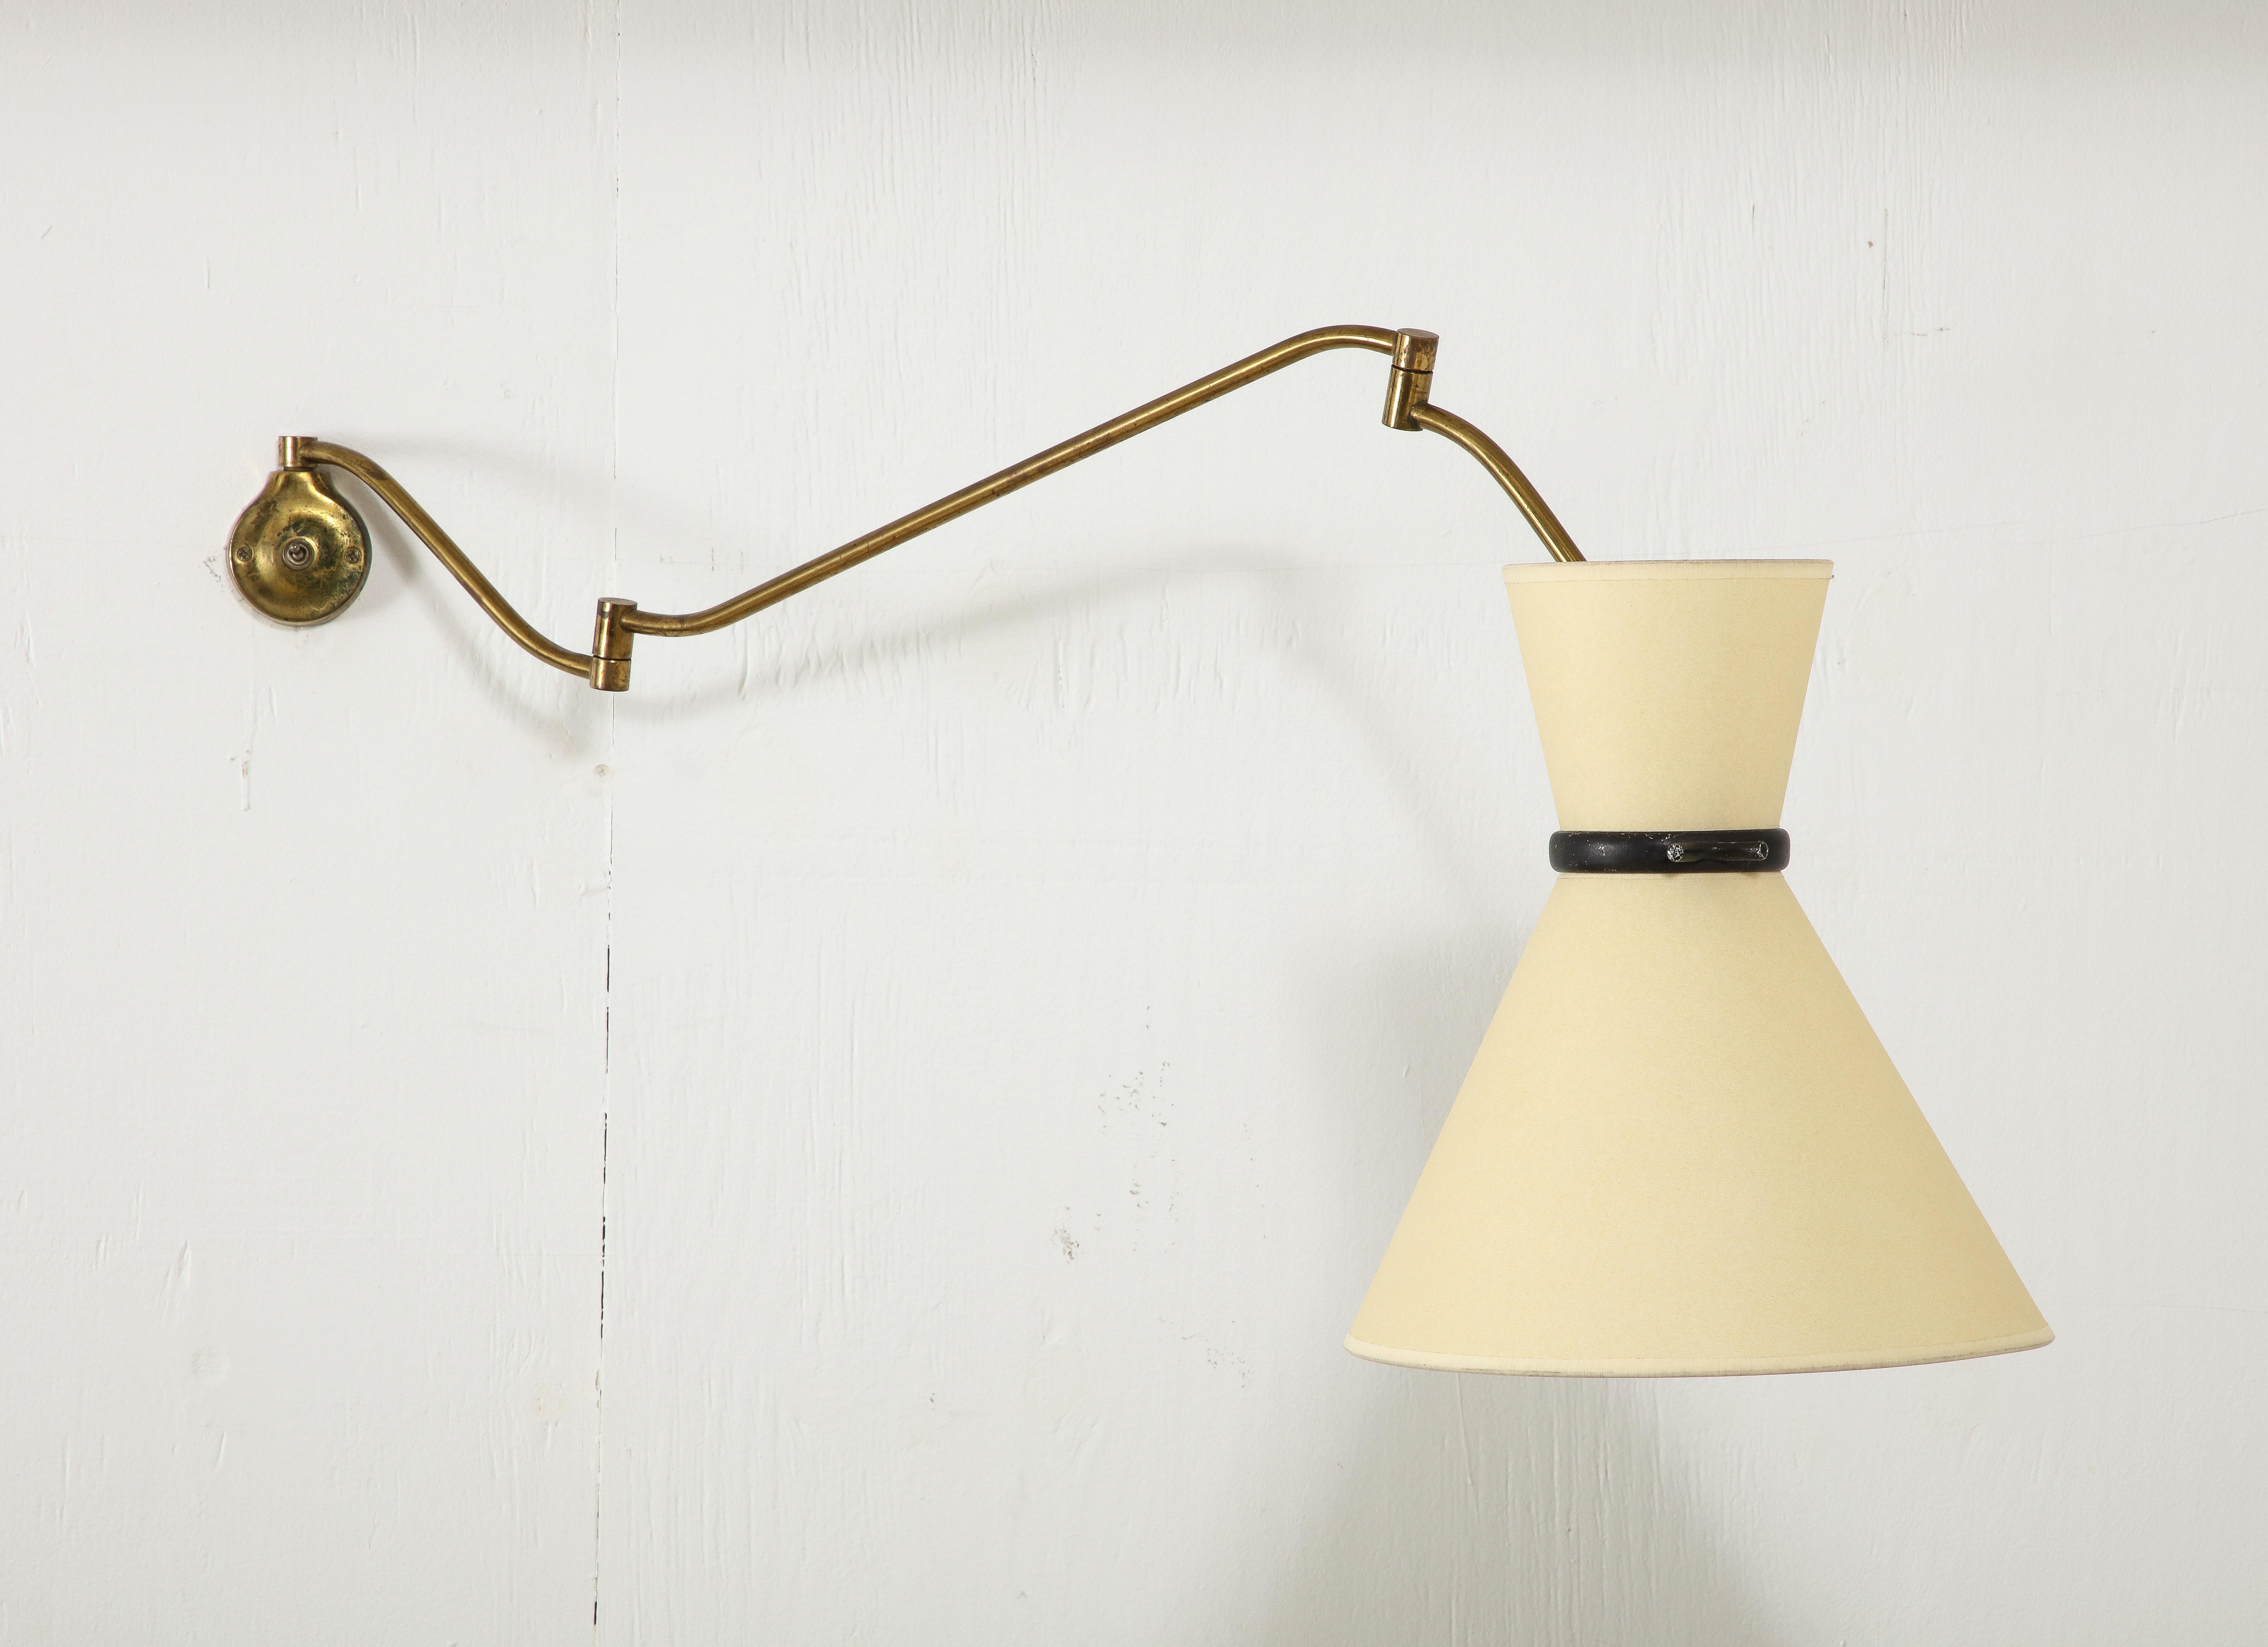 Triple-jointed brass swing arm sconce with a swiveling head.

55x12x12